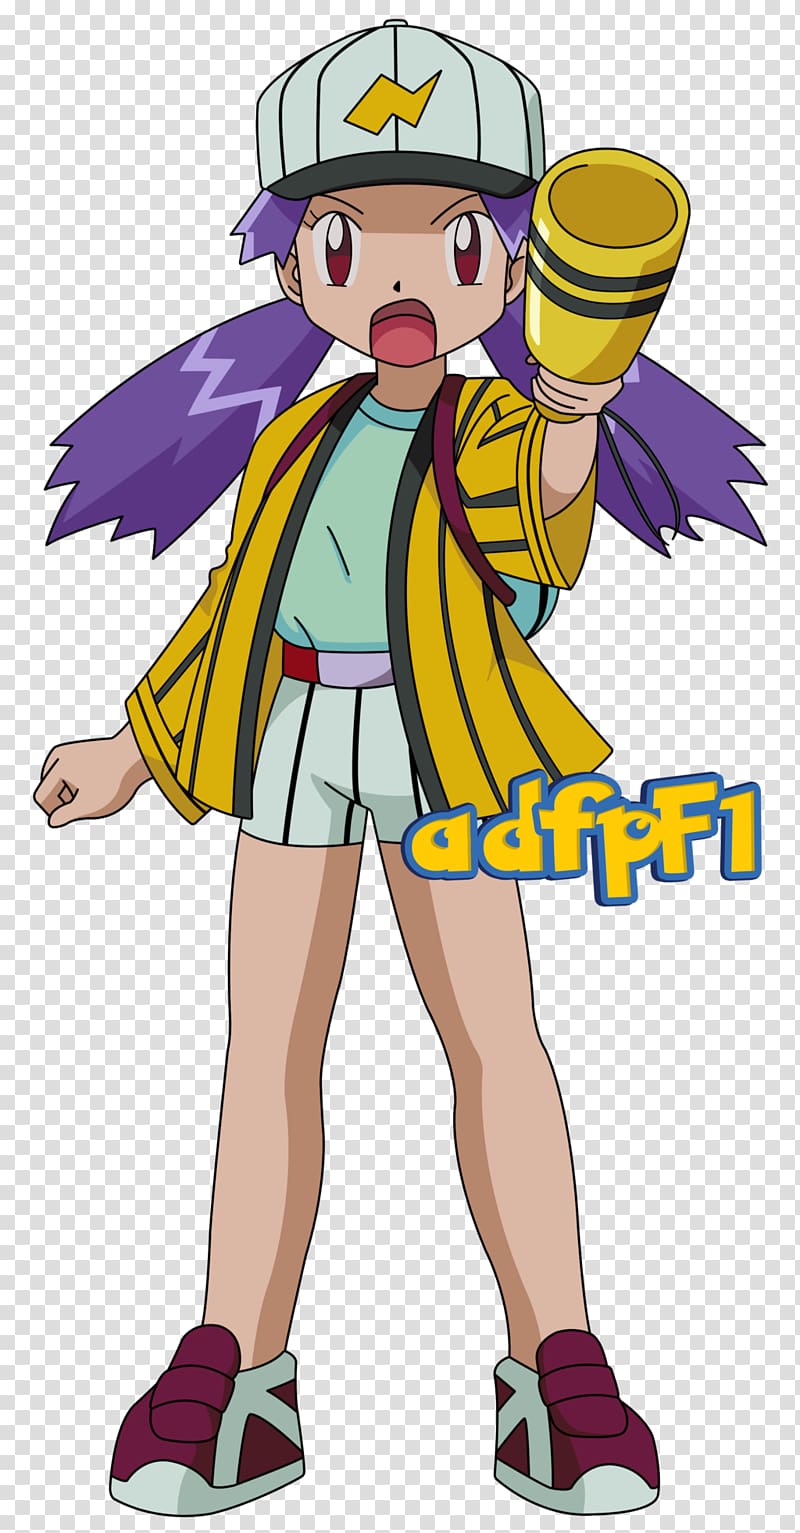 Pokémon Sun and Moon Ash Ketchum Dawn May, others transparent background PNG clipart